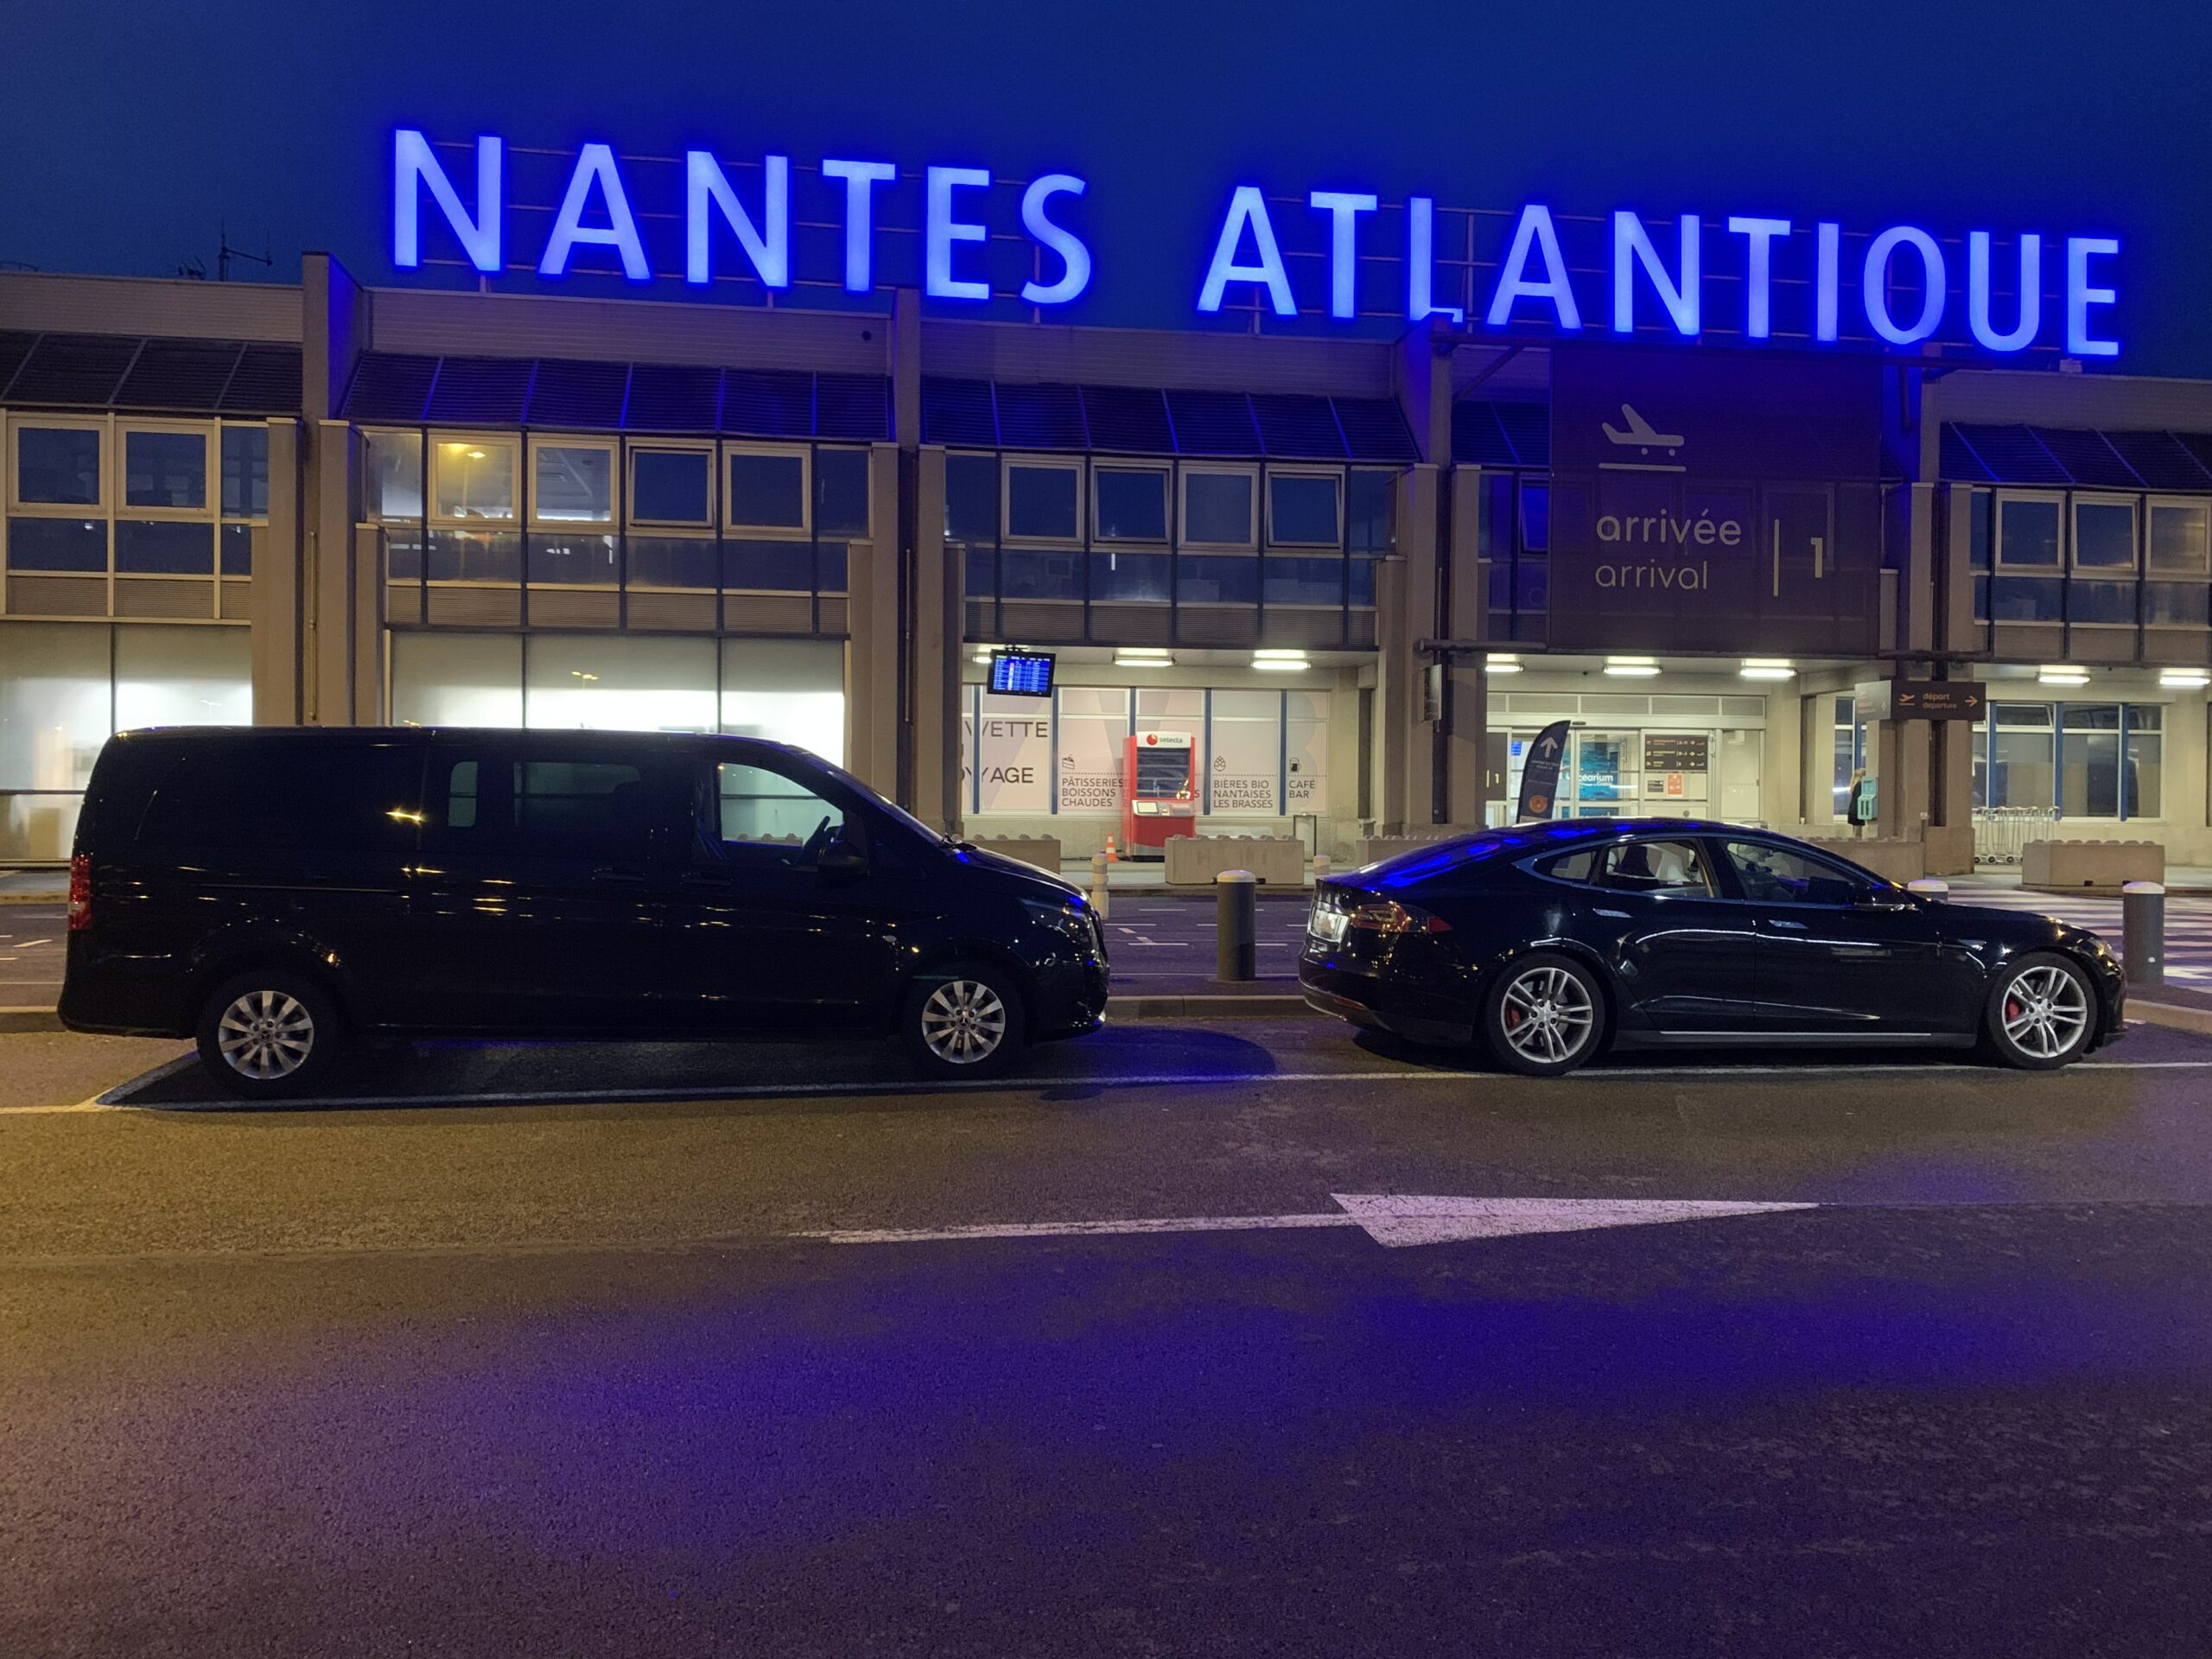 Our vehicules at the Nantes atlantique airport